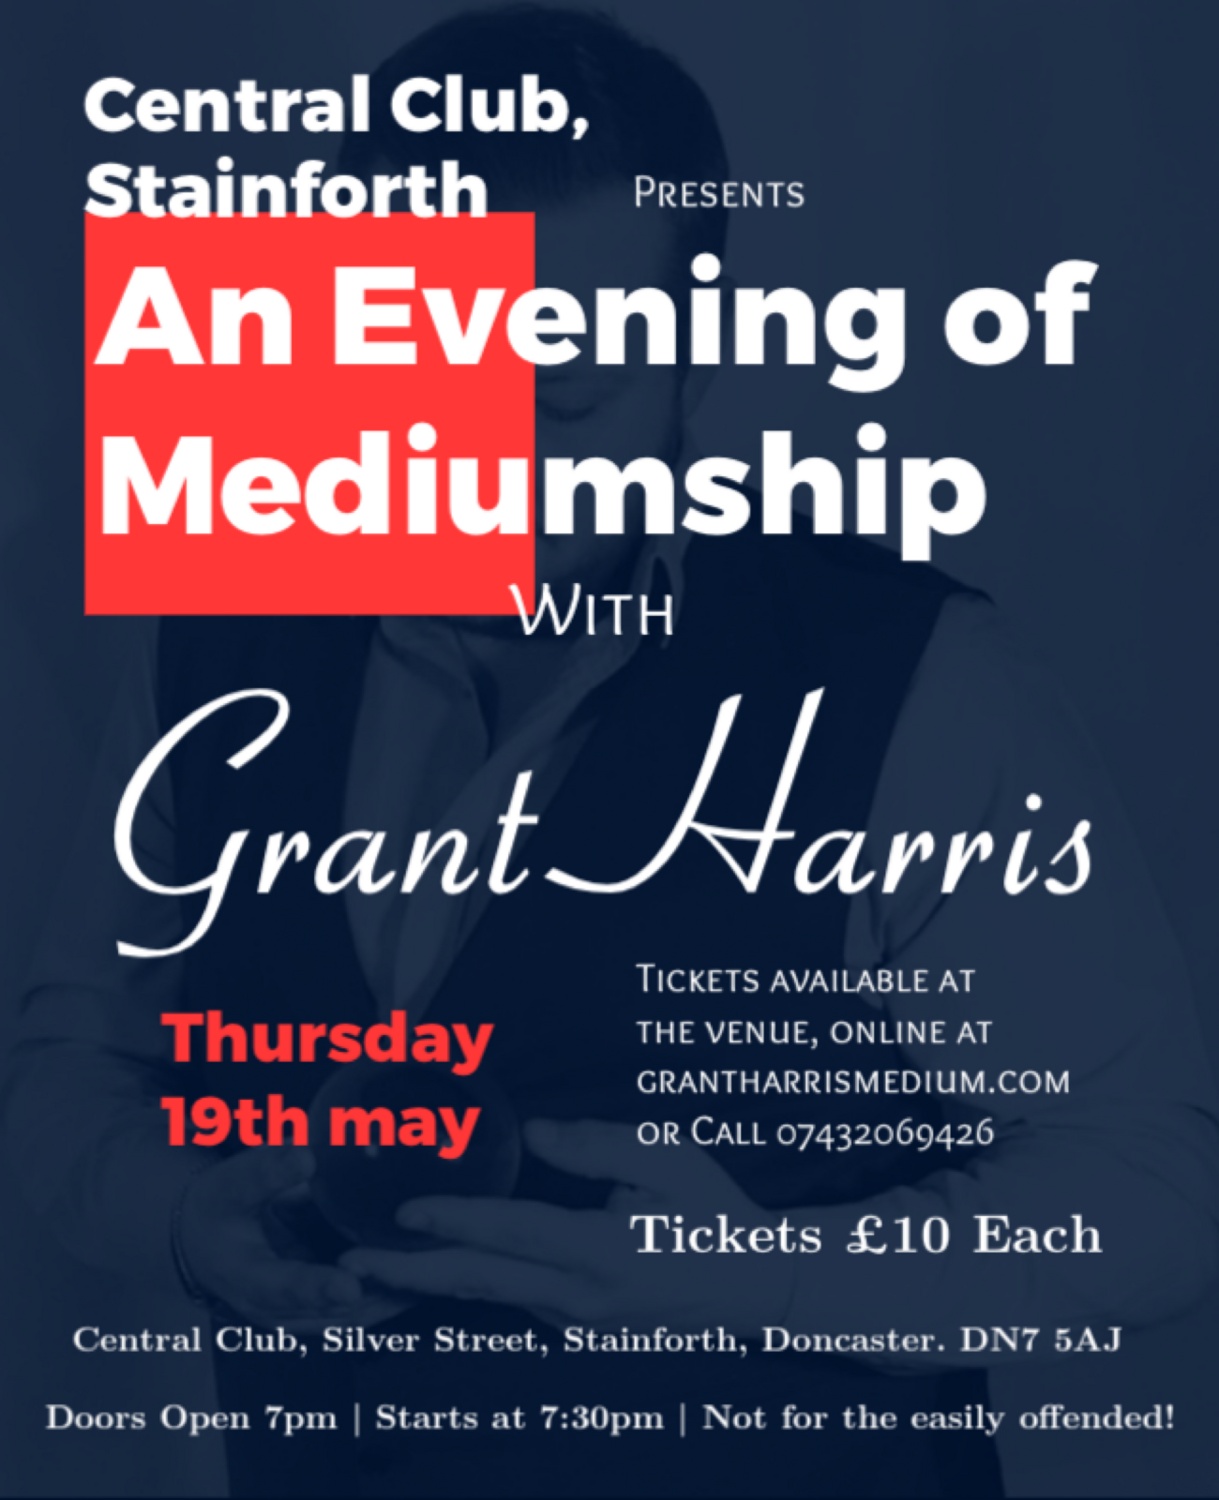 Evening of Mediumship, Central Club, Stainforth, Thu 19th May 2022